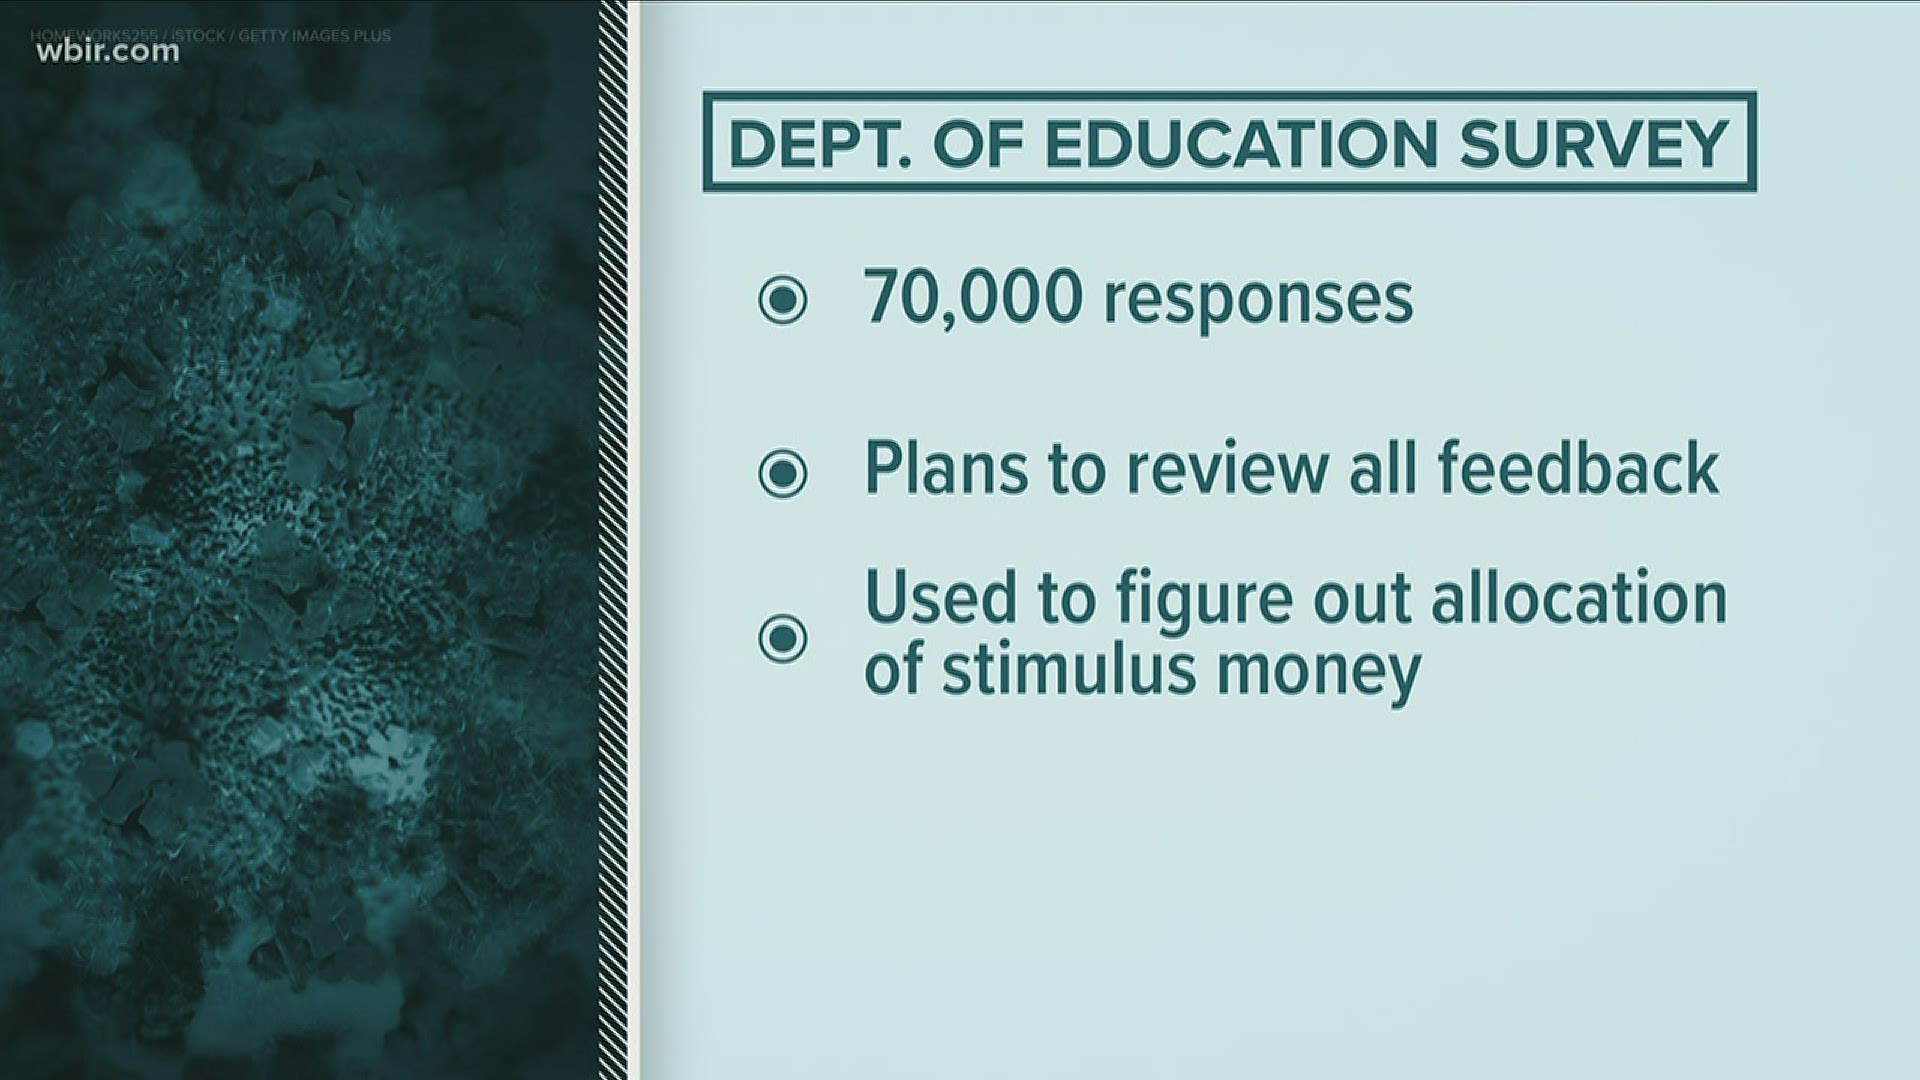 The Tennessee Department of Education said it received more than 70,000 responses.